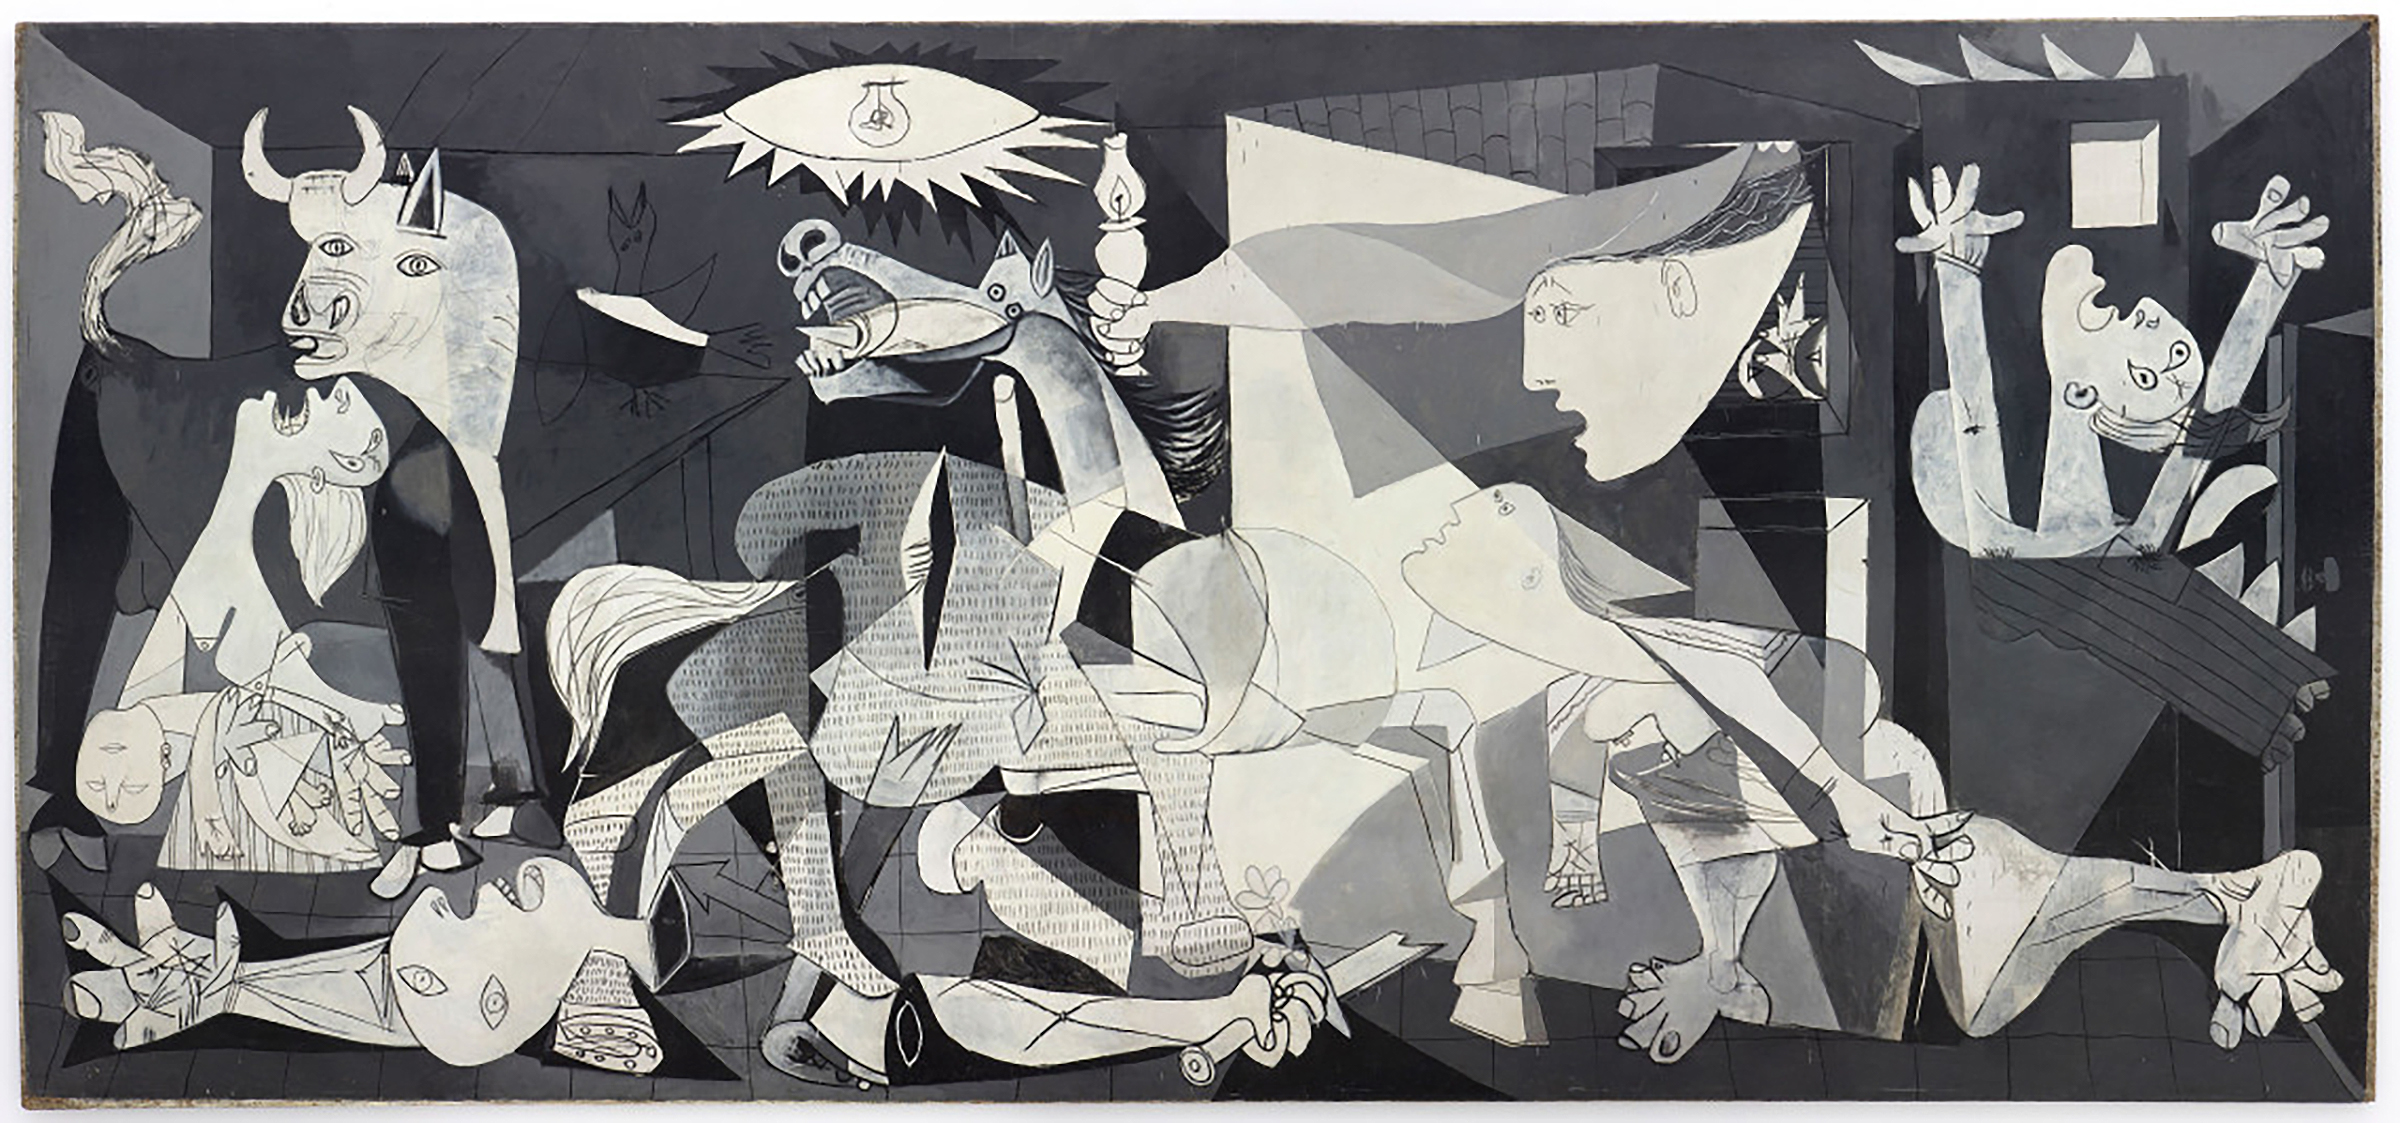 Picasso's Guernica, painted in 1937